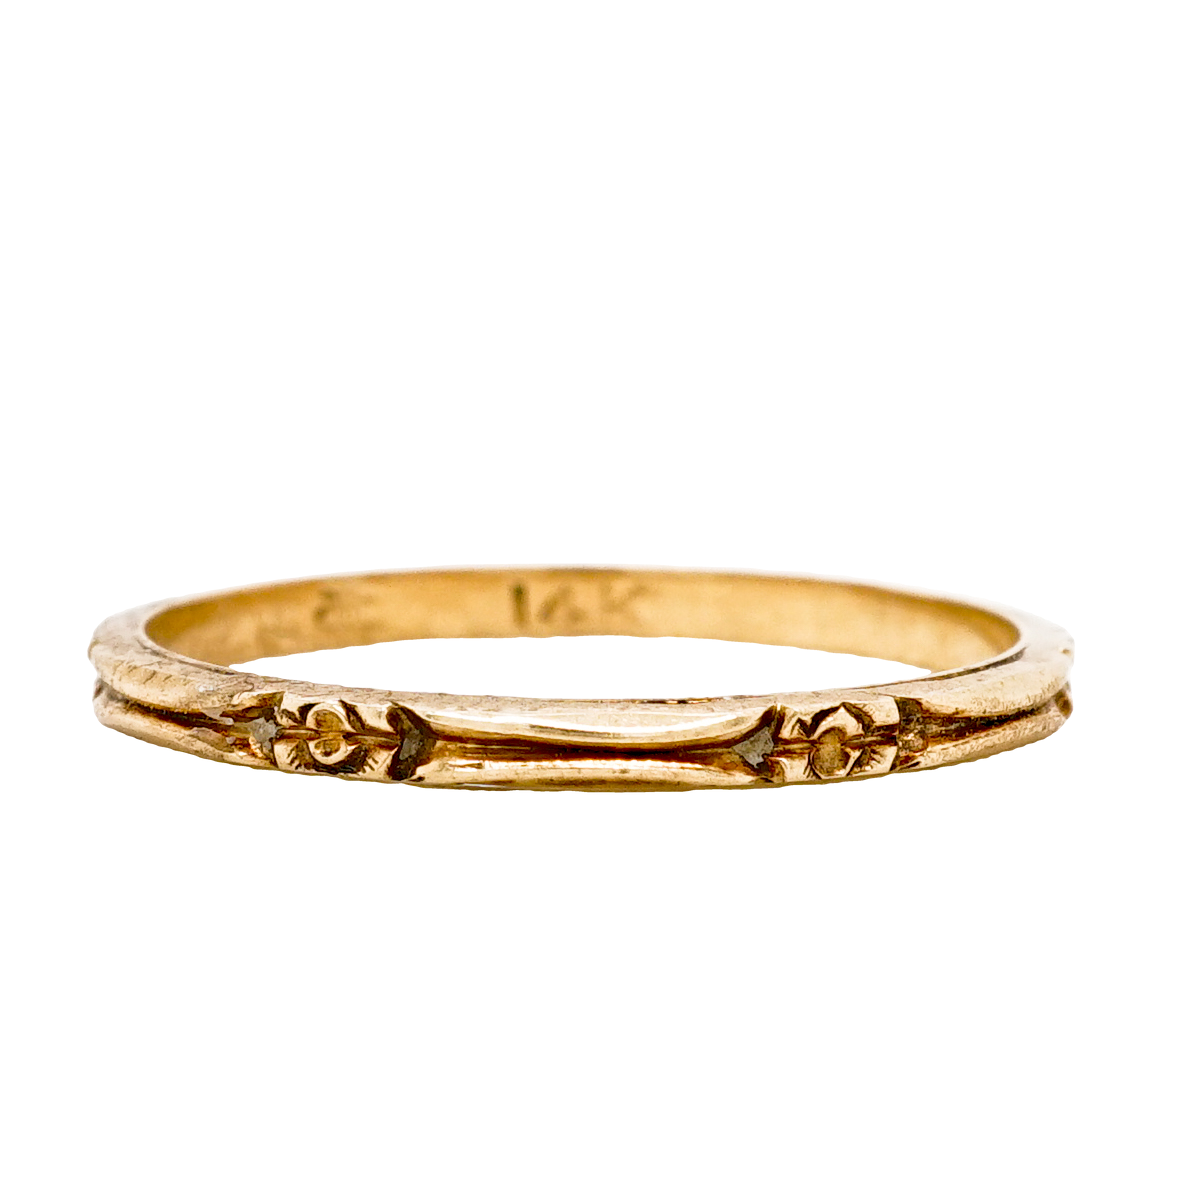 Thin Art Deco Engraved Wedding Band in 14k Yellow Gold